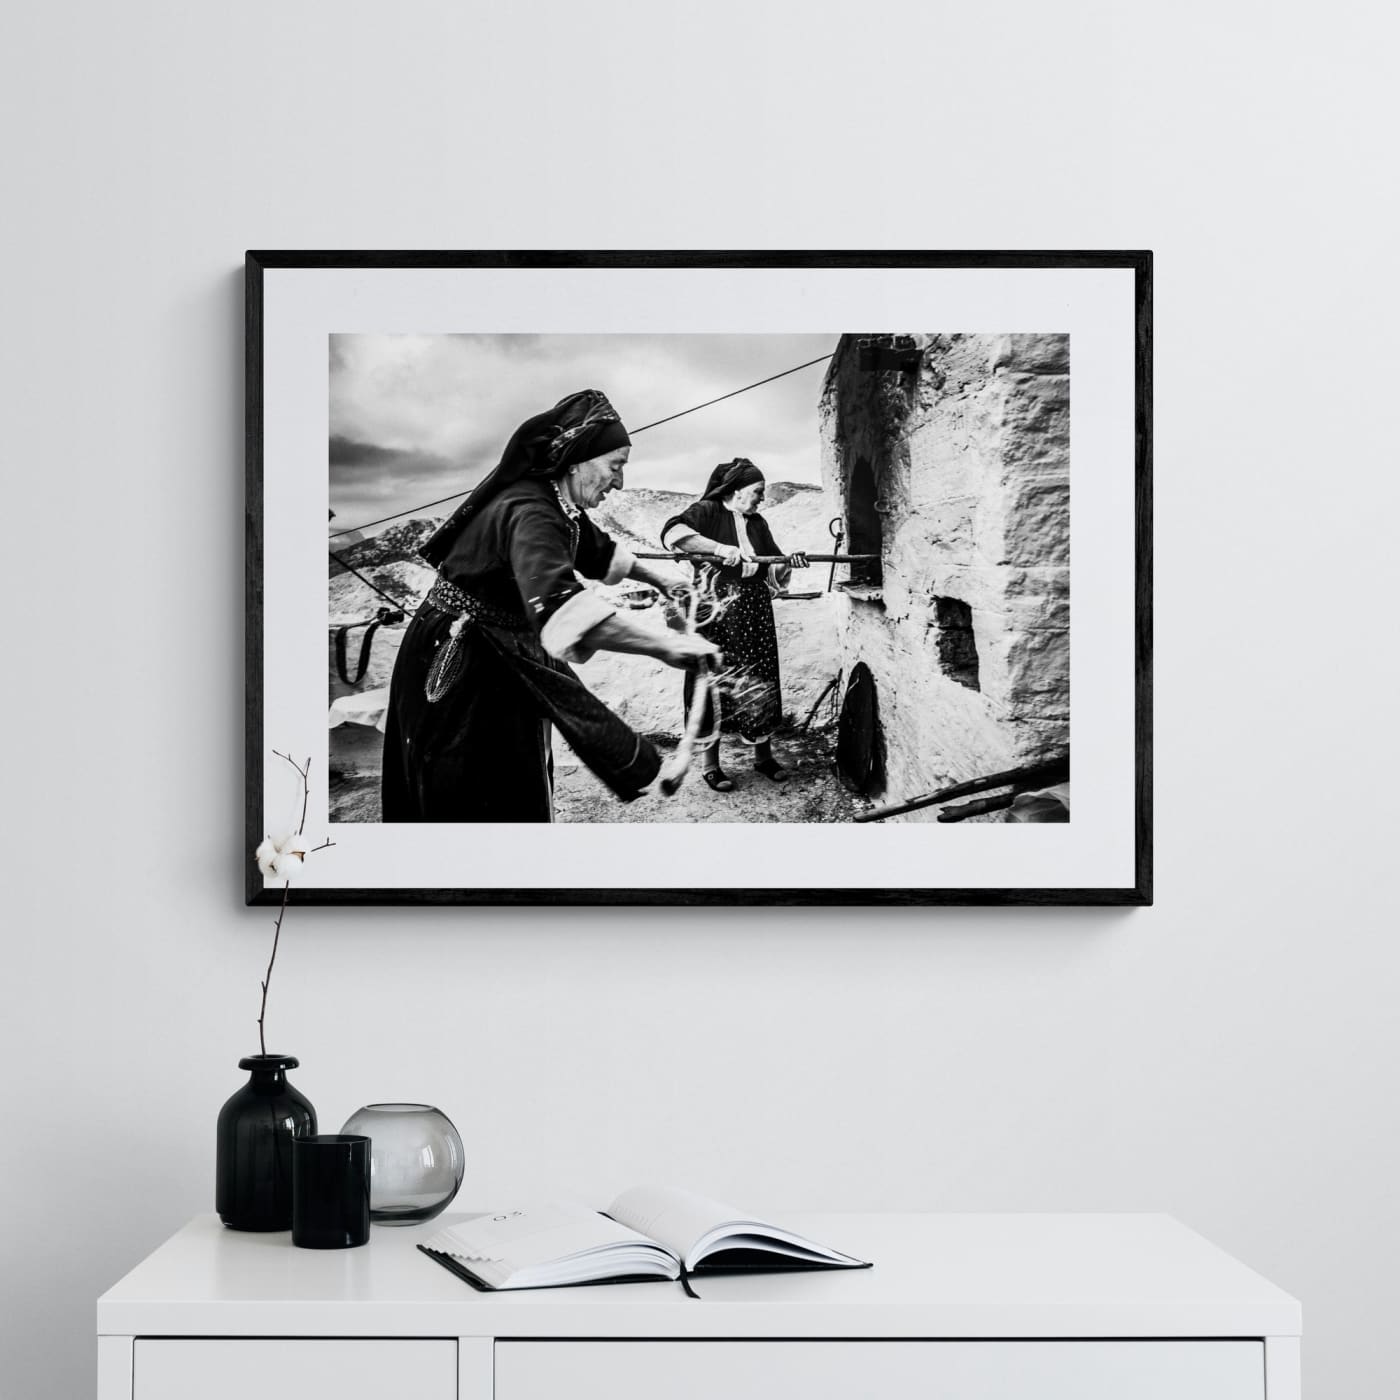 Black and White Photography Wall Art Greece | Women lighting up the wood oven Olympos Karpathos Dodecanese by George Tatakis - single framed photo